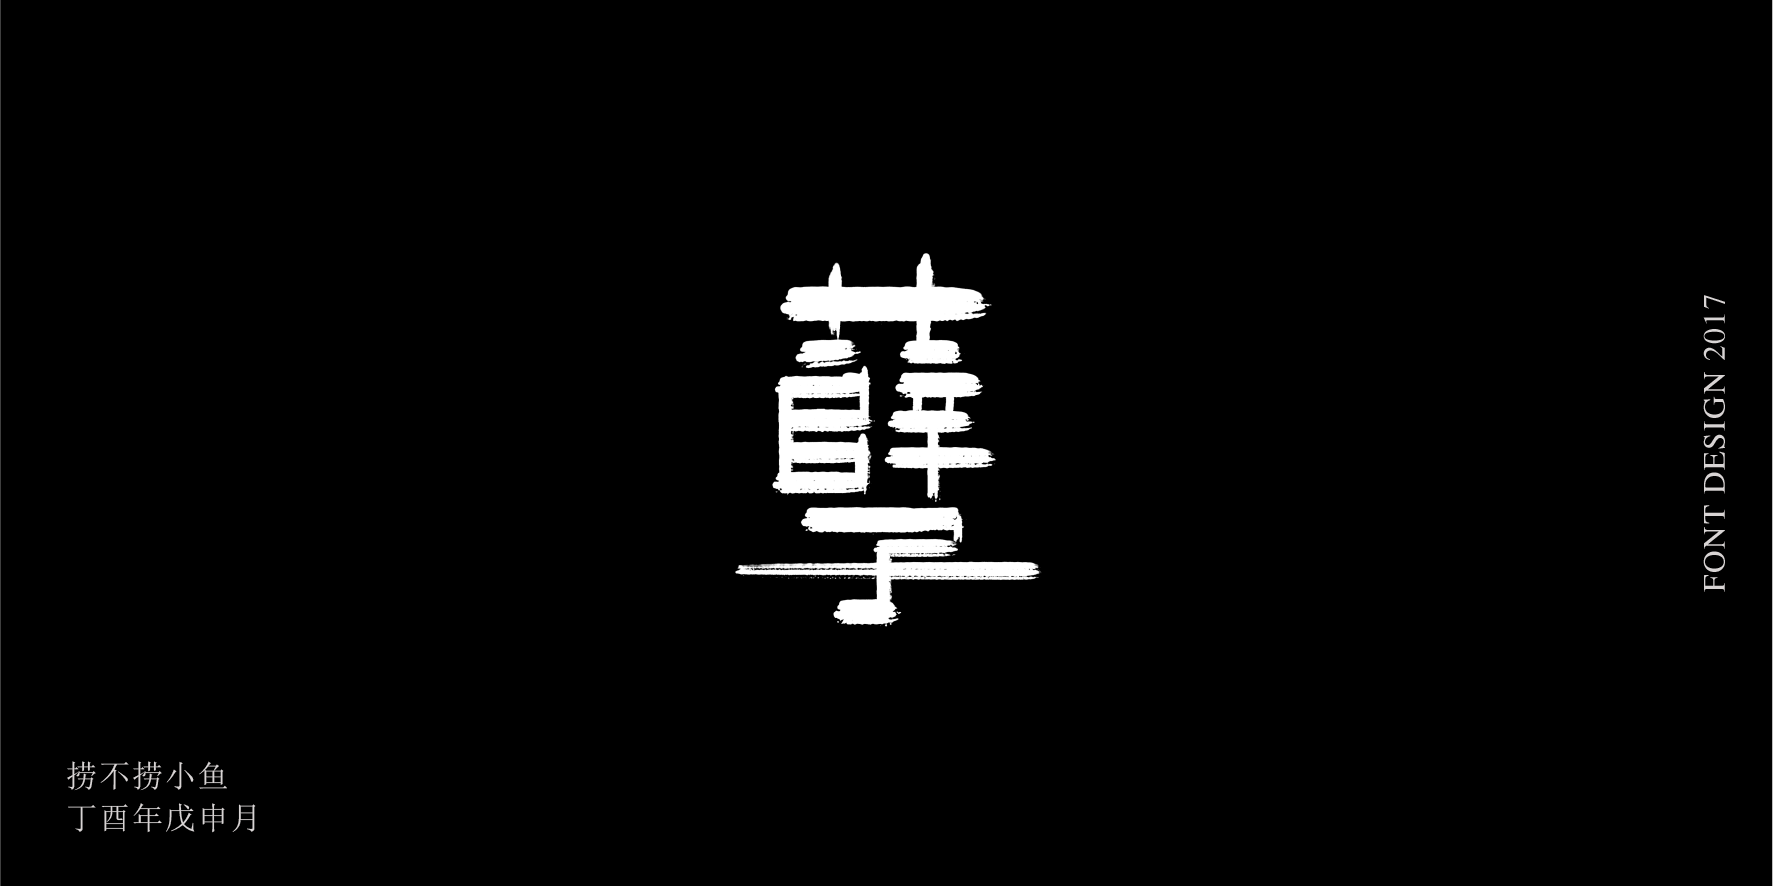 27P My Chinese font calligraphy exercises